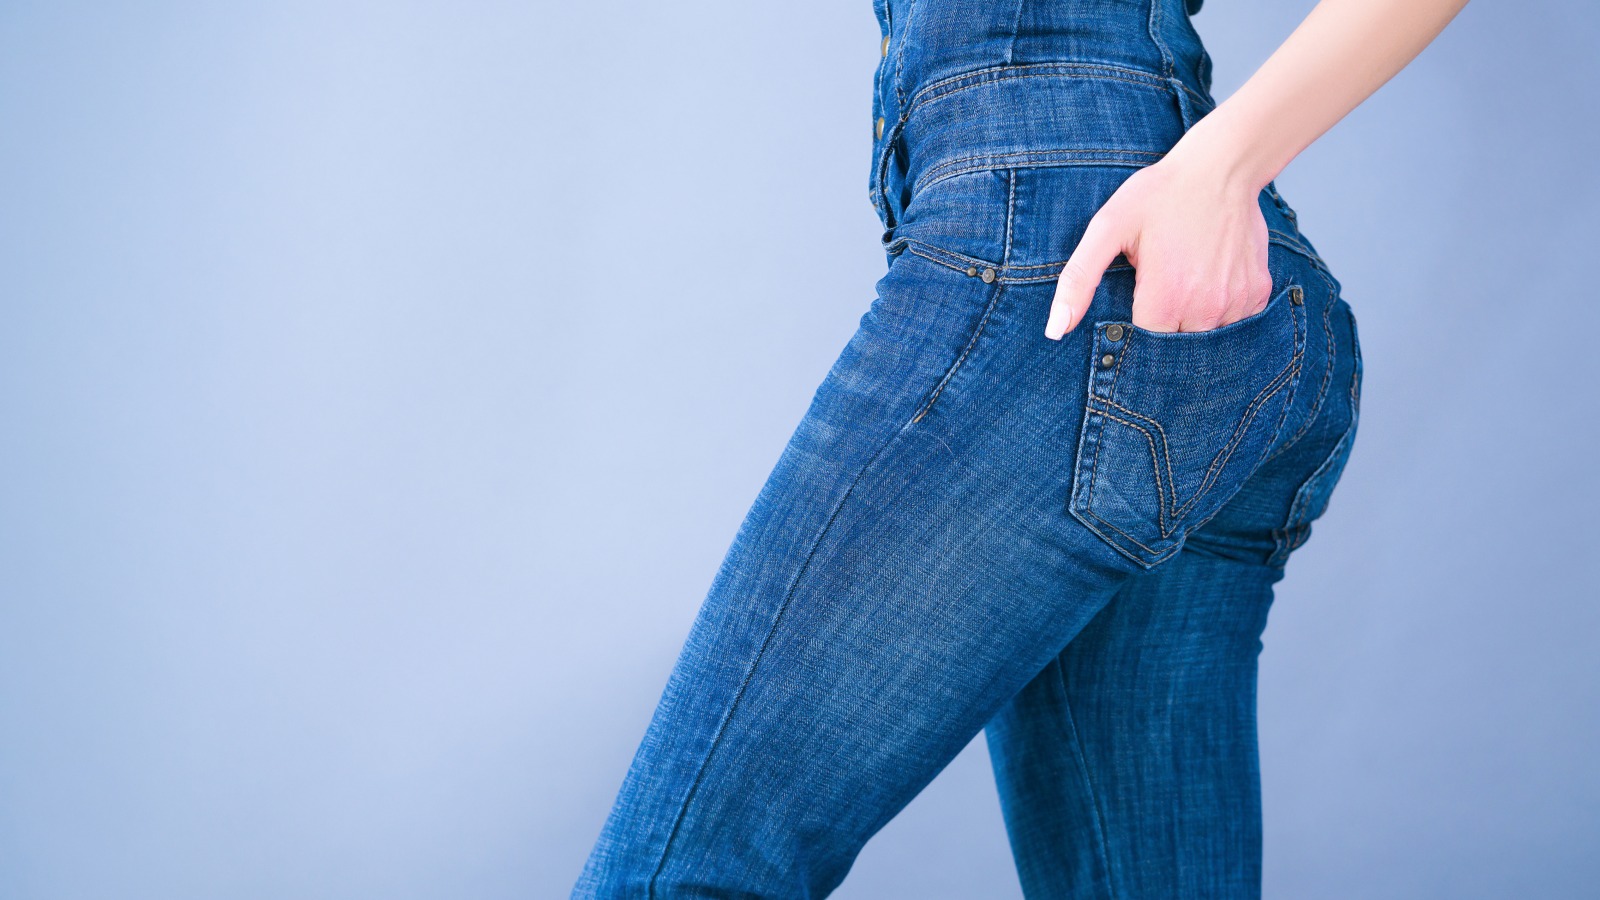 Here's How To Save Jeans That Are Too Stretched Out